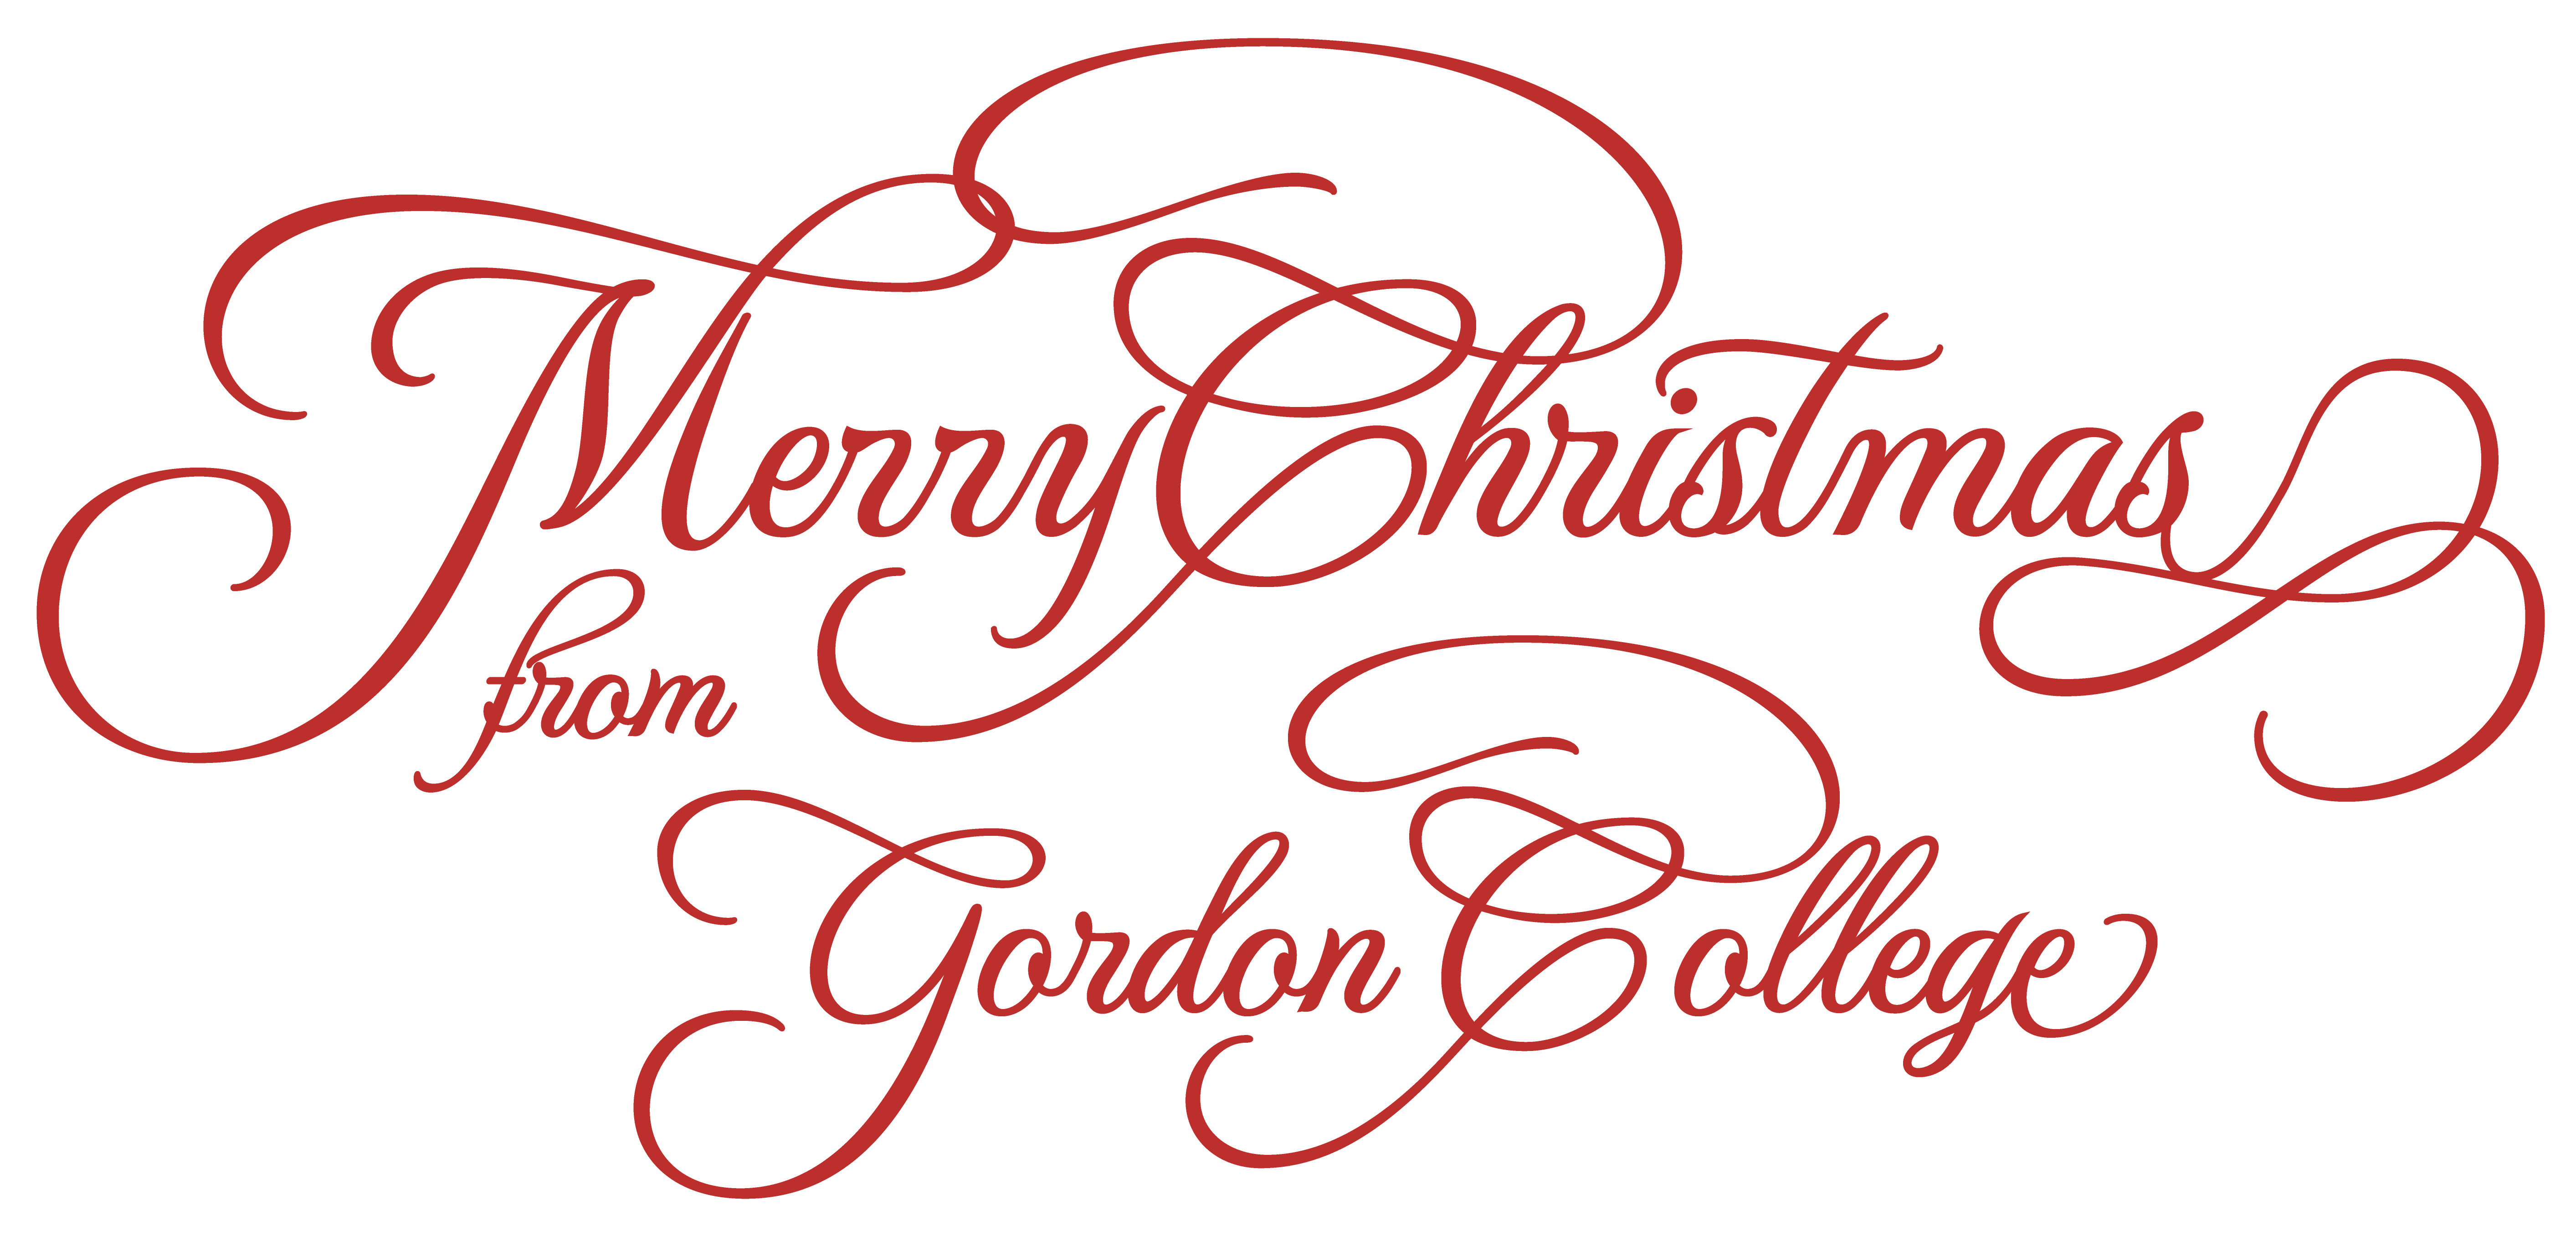 Merry Christmas from Gordon College